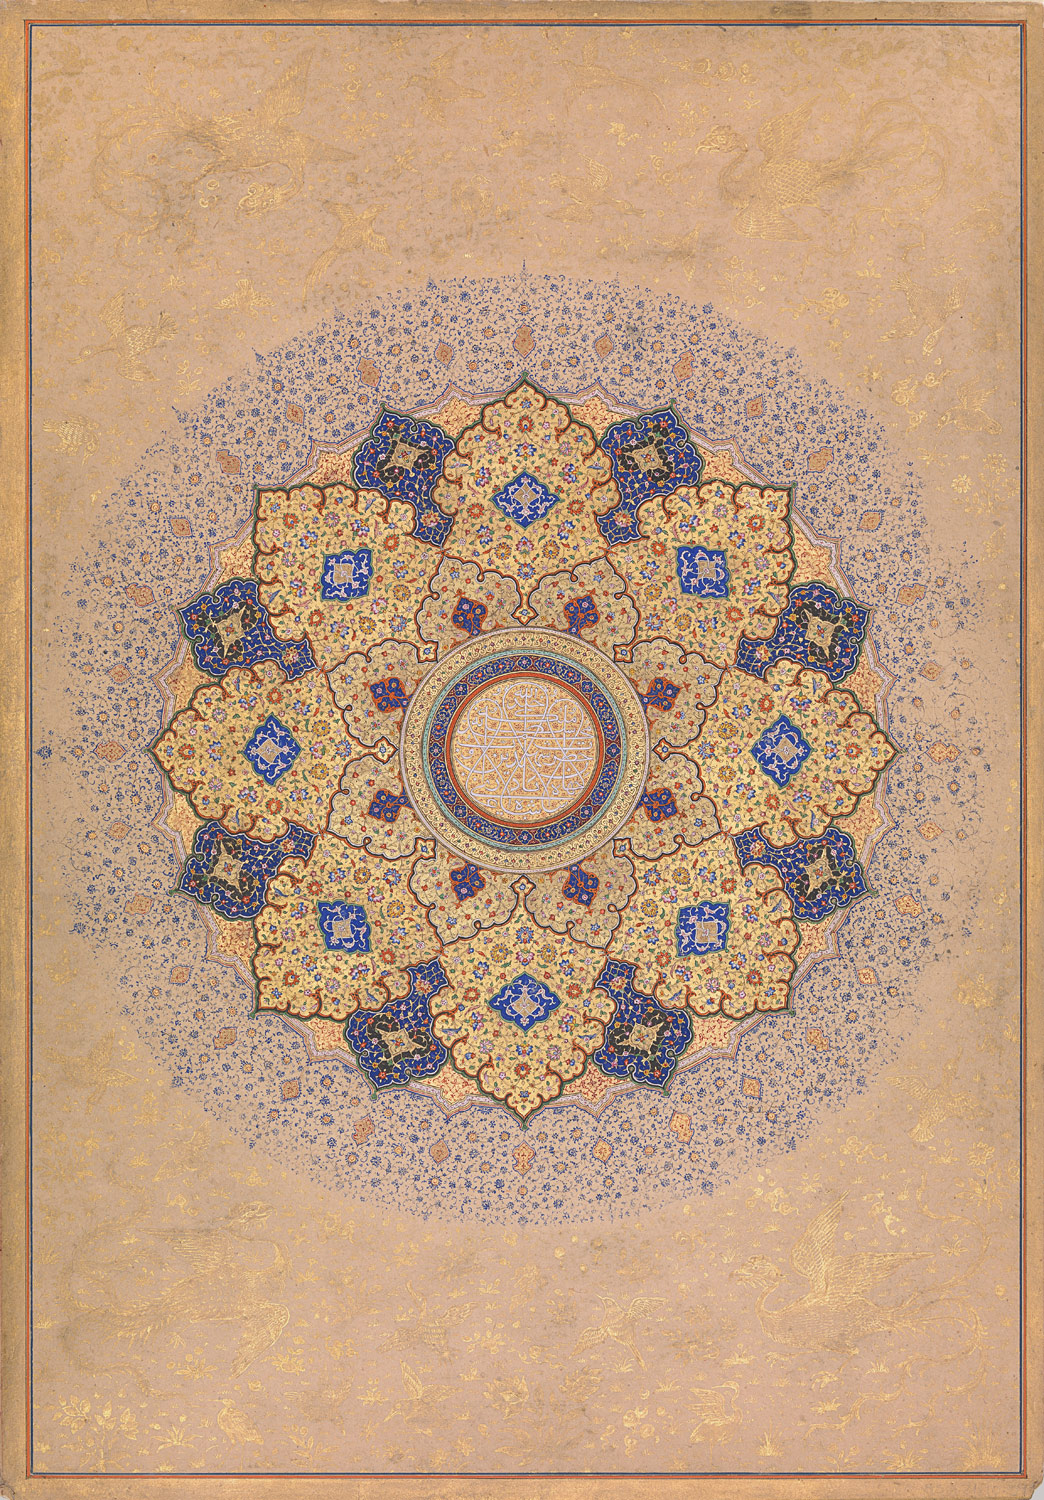 Rosette (shamsa) bearing the name and titles of Emperor Shah Jahan (r. 1628â58), Mughal, 17th century